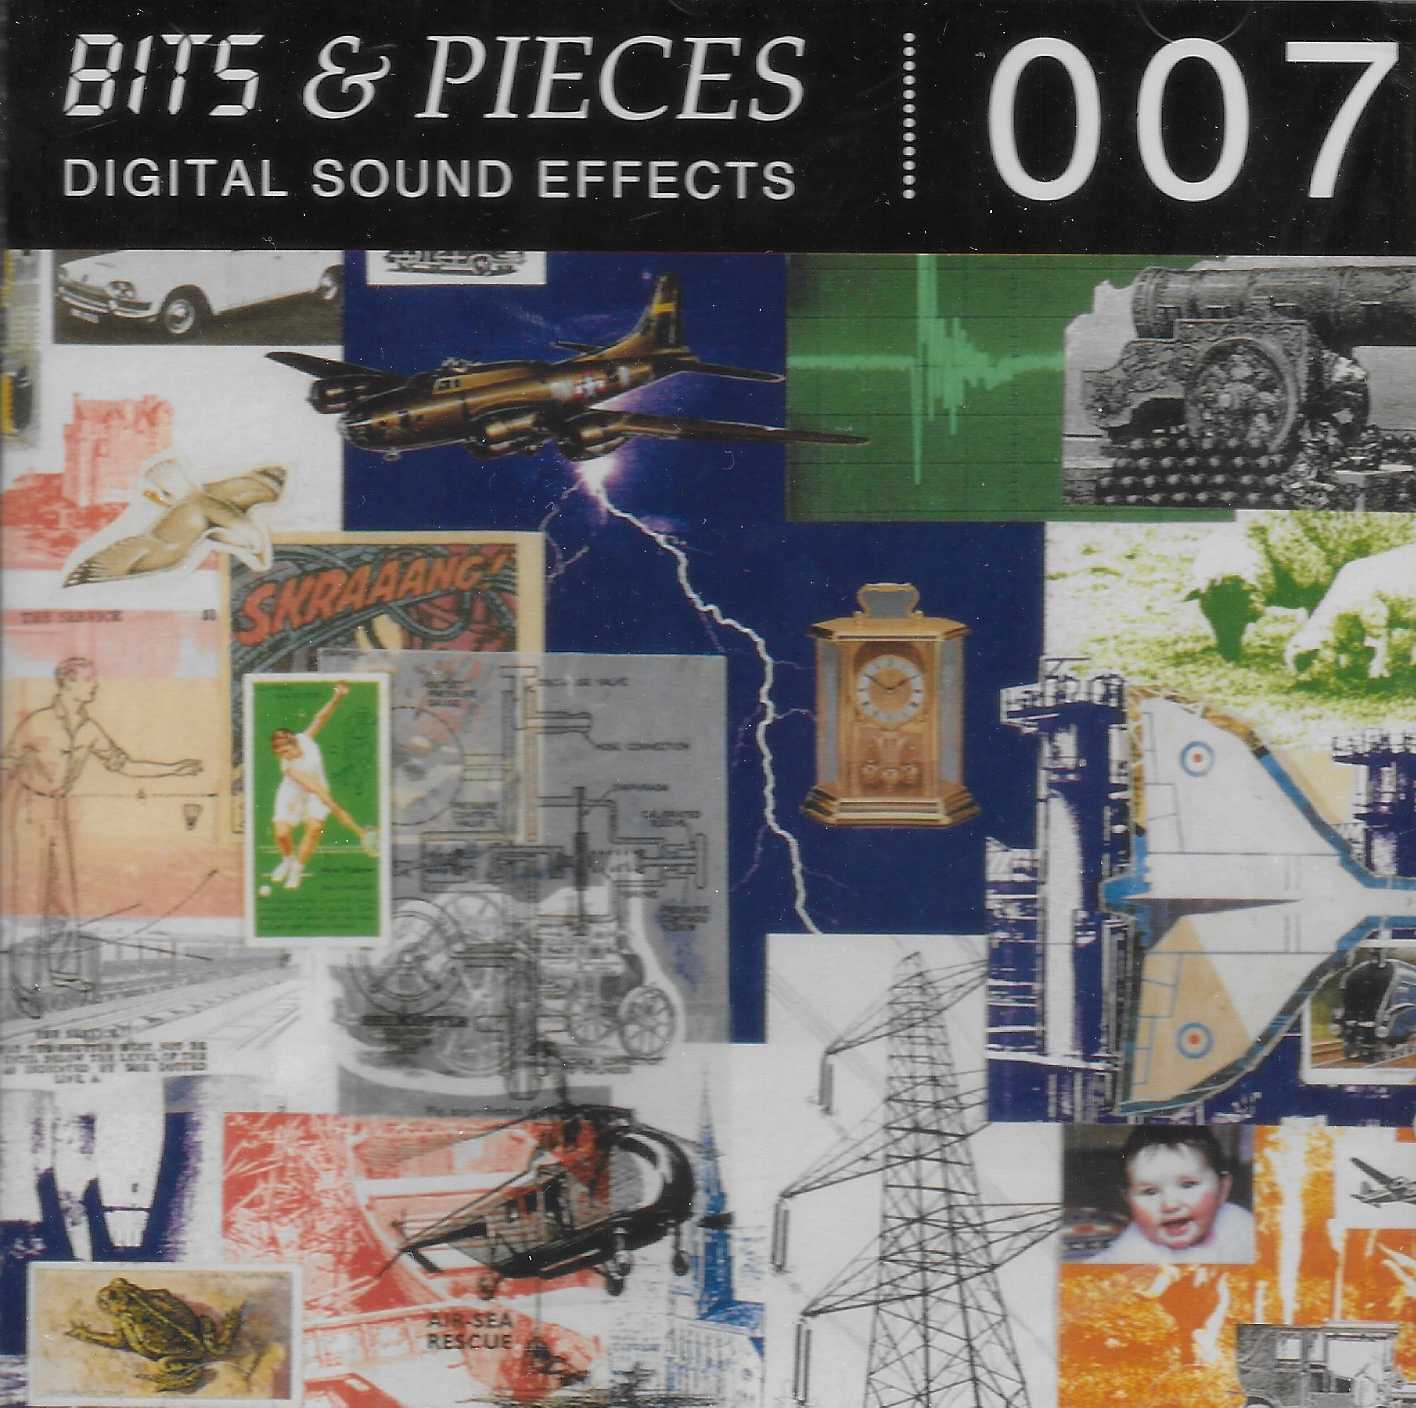 Picture of BITS 007 Bits & pieces digital sound effects 007 by artist Various from ITV, Channel 4 and Channel 5 cds library